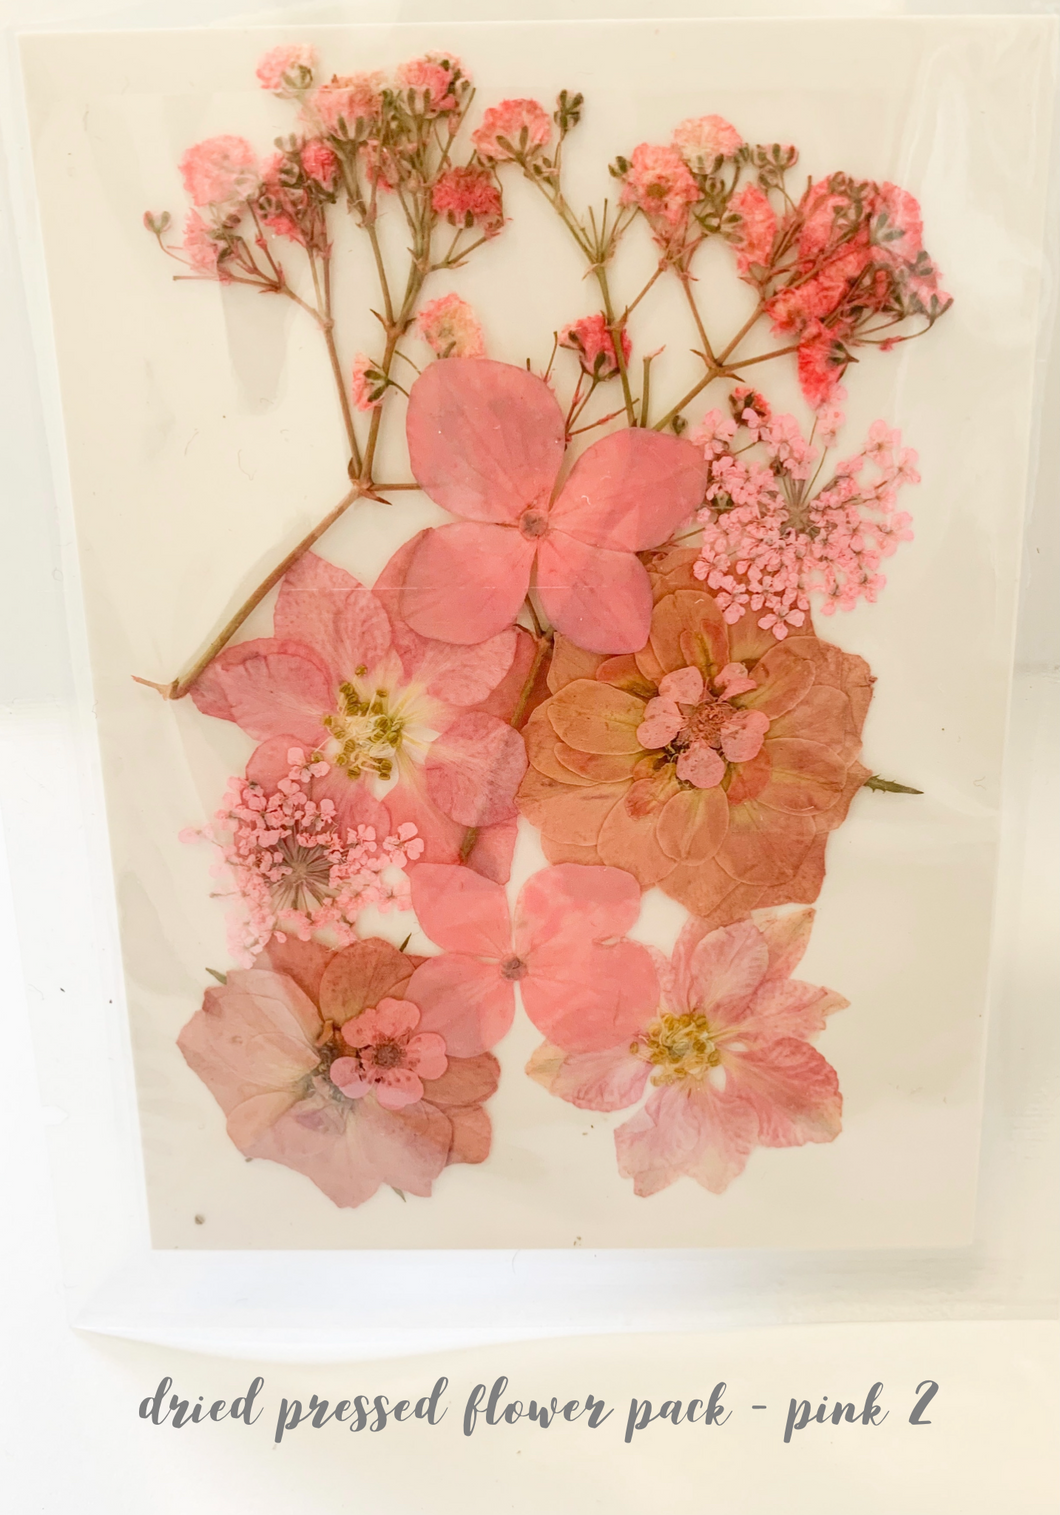 Small Dried Pressed Flower Pack - Pink 2